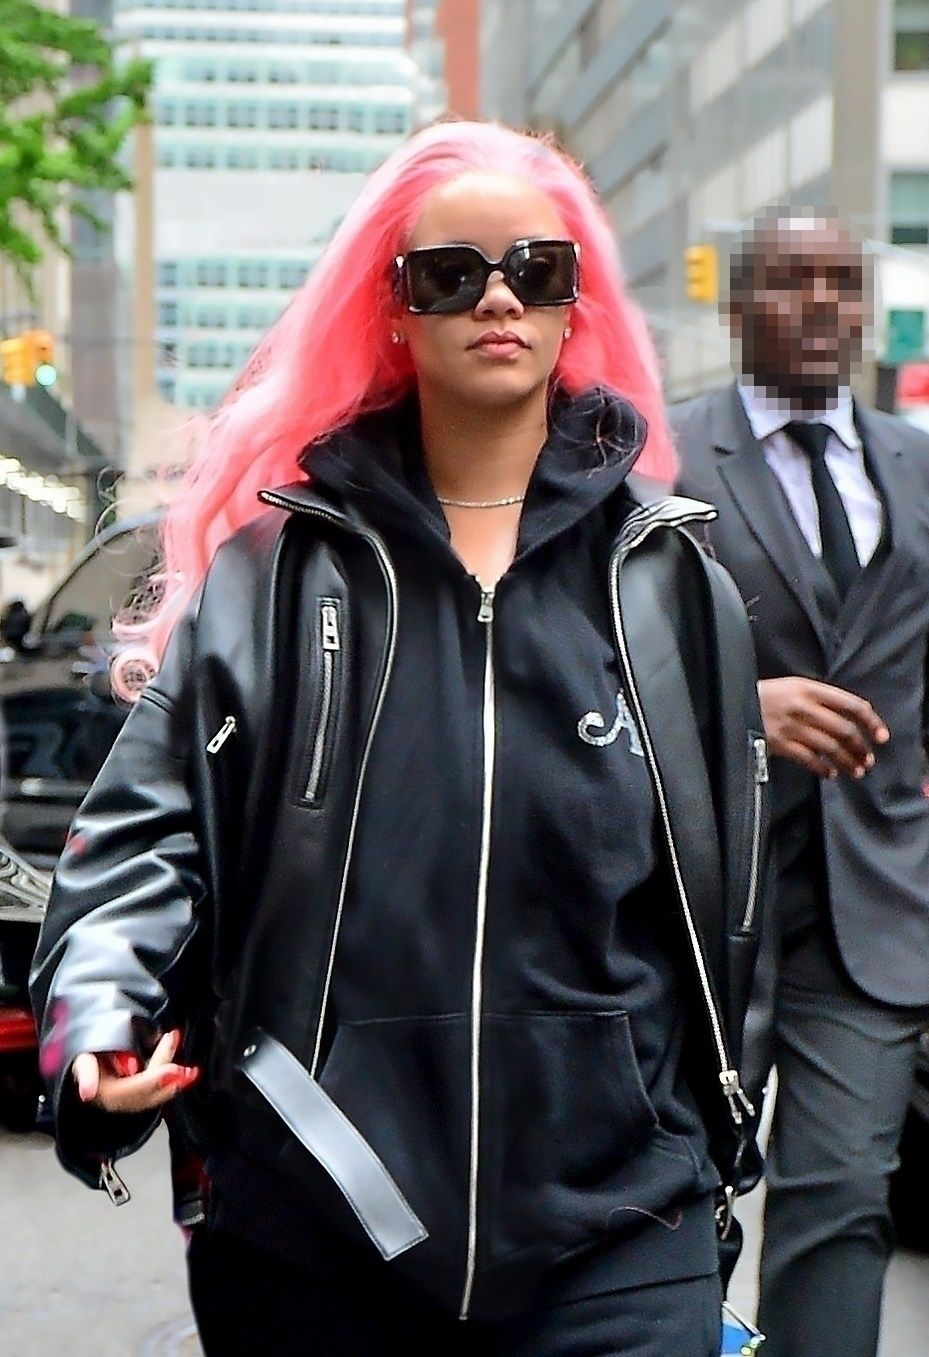 Rihanna dyed her hair pink